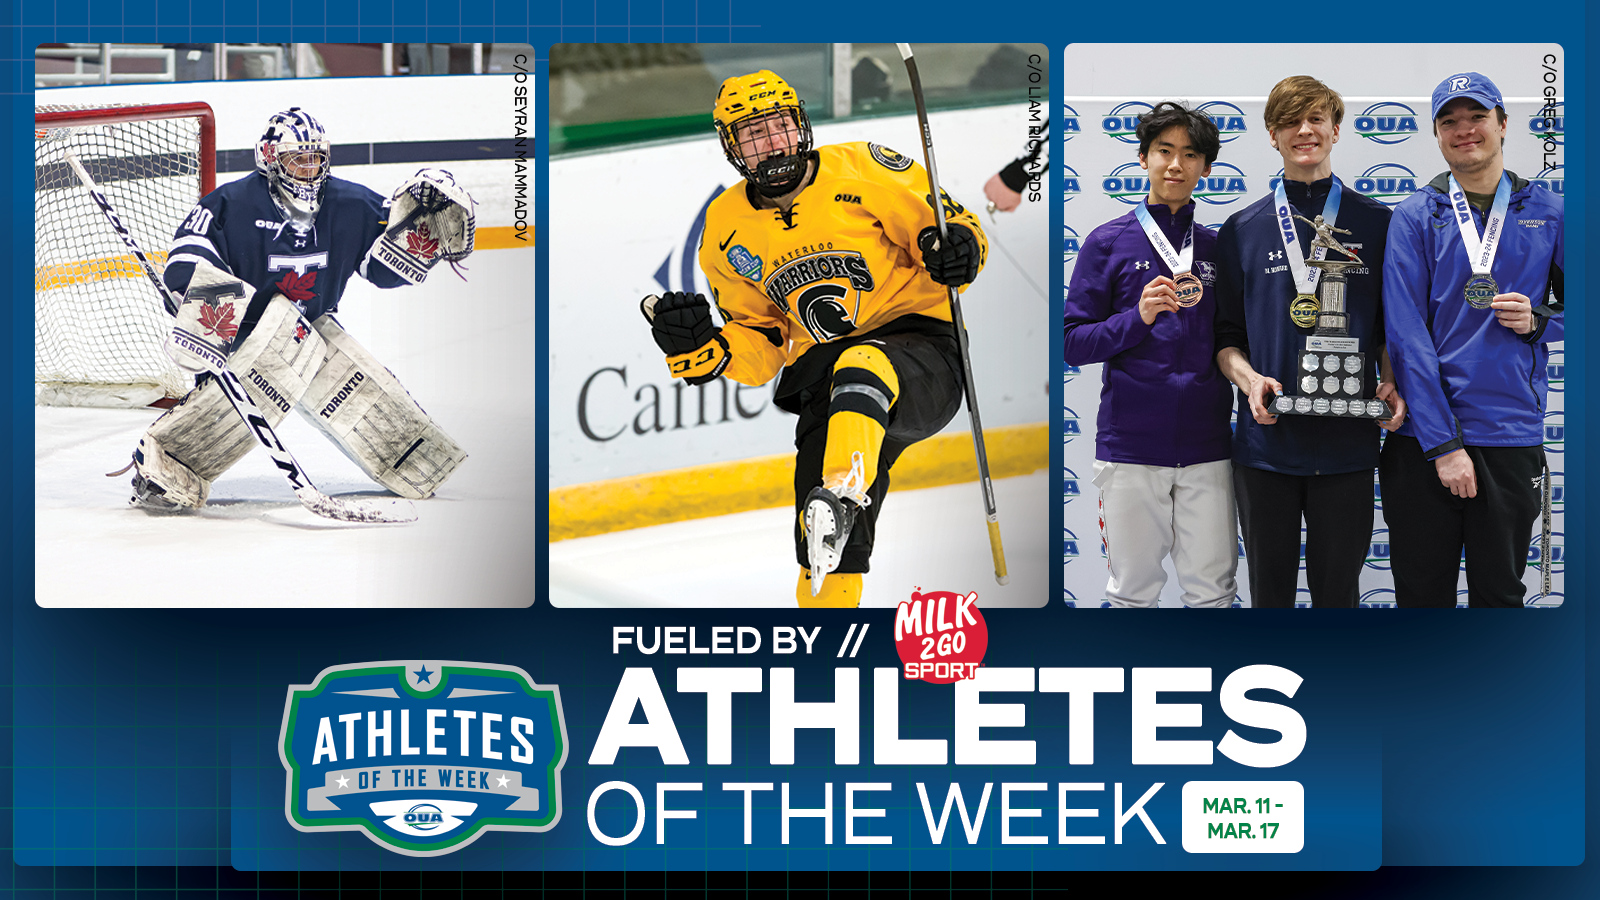 Graphic on a predominantly blue background with images and text. Three images are large and centered across the length of the graphic. The text logo at the bottom reads "Athletes of the Week" stating the time period of "March 11-  March 17" 2024. The athlete of the left is Erica Fryer of Toronto Women's Hockey. The middle is Tatum James of Waterloo Women's Hockey, and on the right is Mike Howard of Toronto Men's Fencing